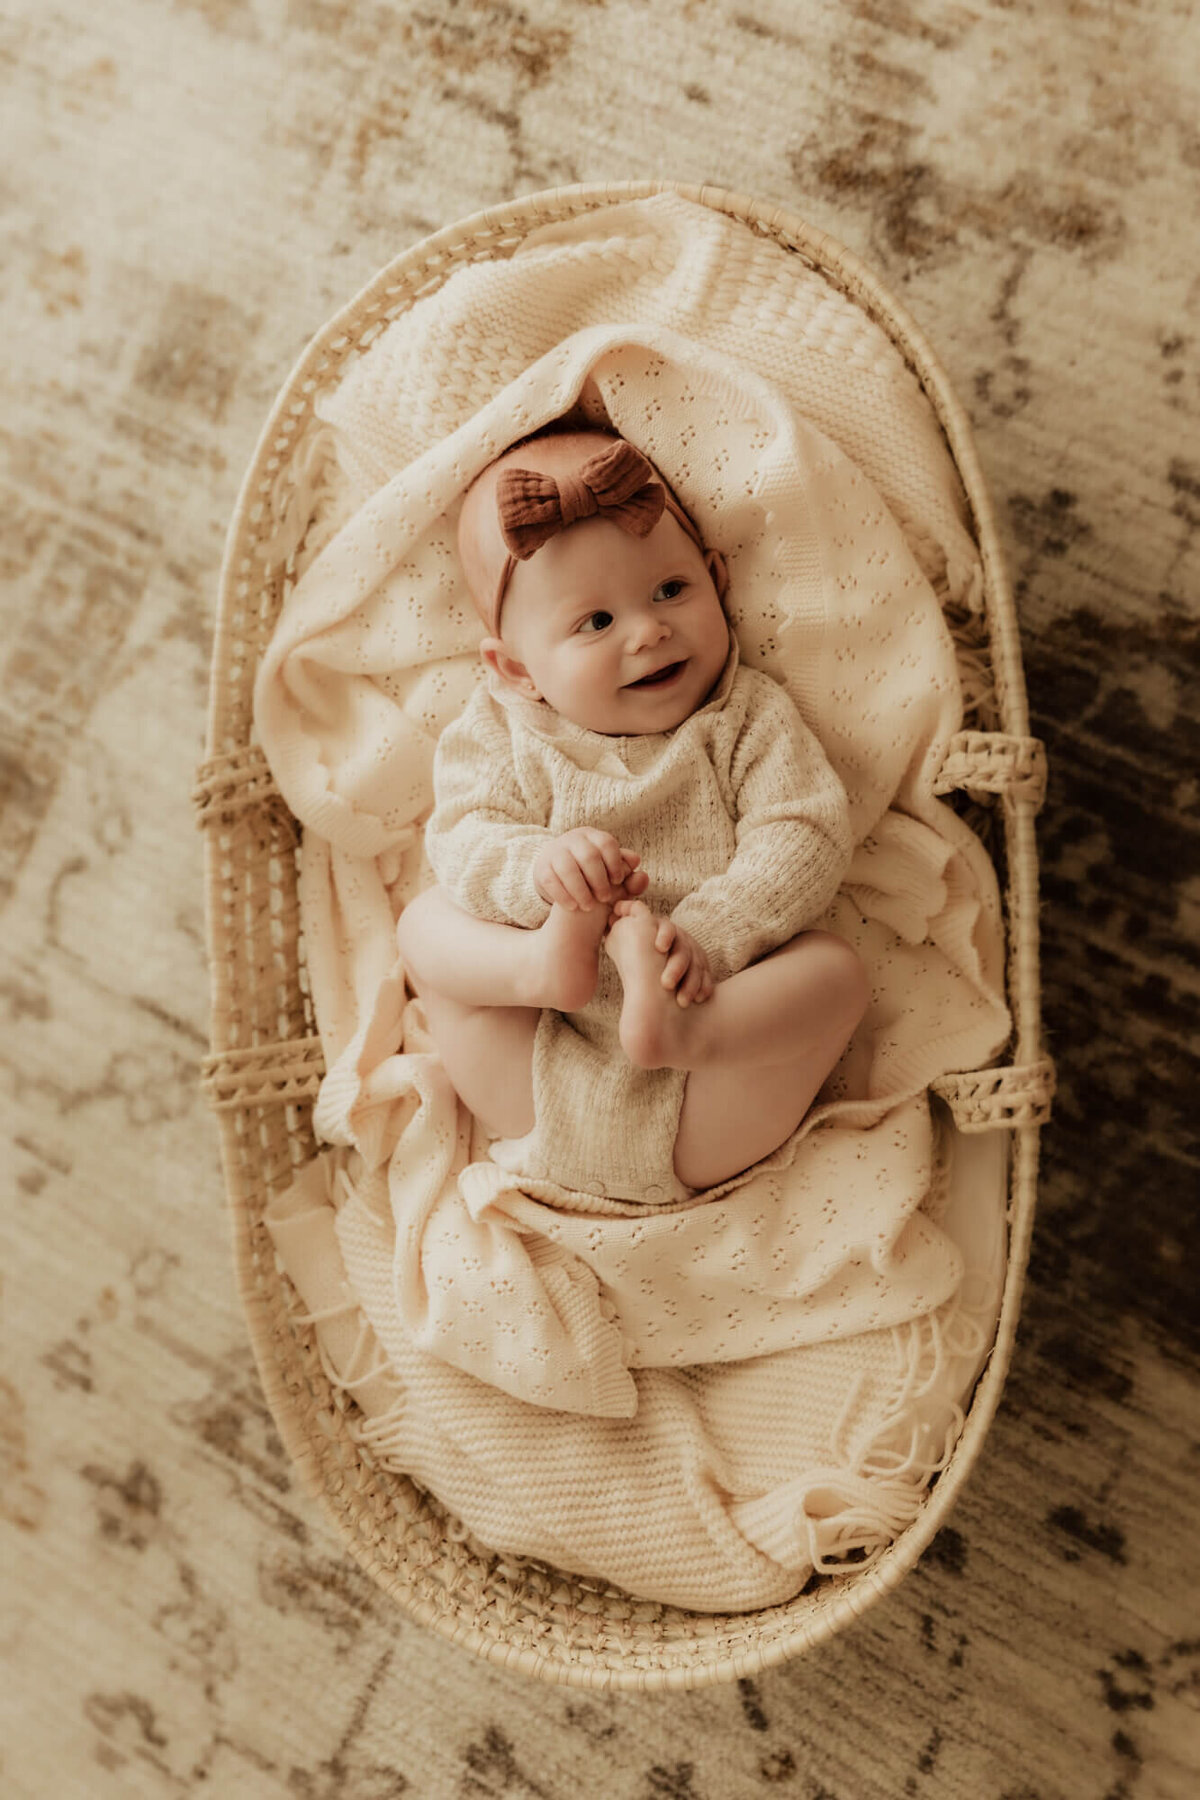 Baby girl laying in a basket while holding her feet.